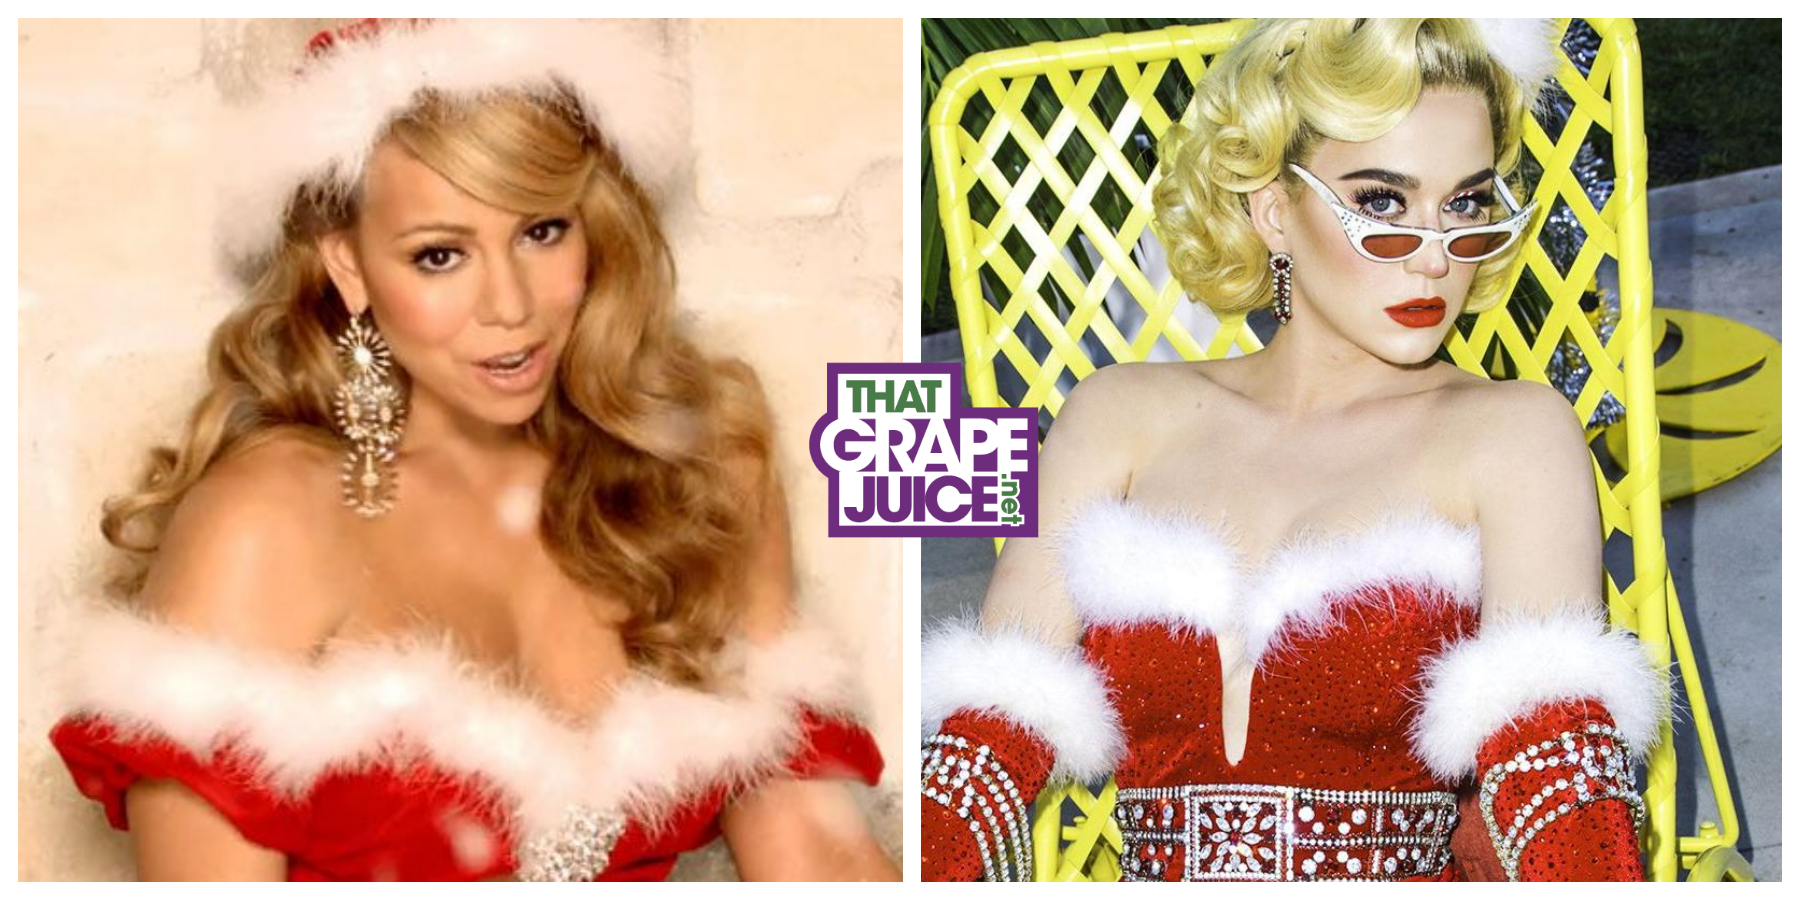 RIAA: Mariah Carey’s ‘All I Want for Christmas’ Ties Katy Perry’s Record For Highest-Certified Female Hit of All Time